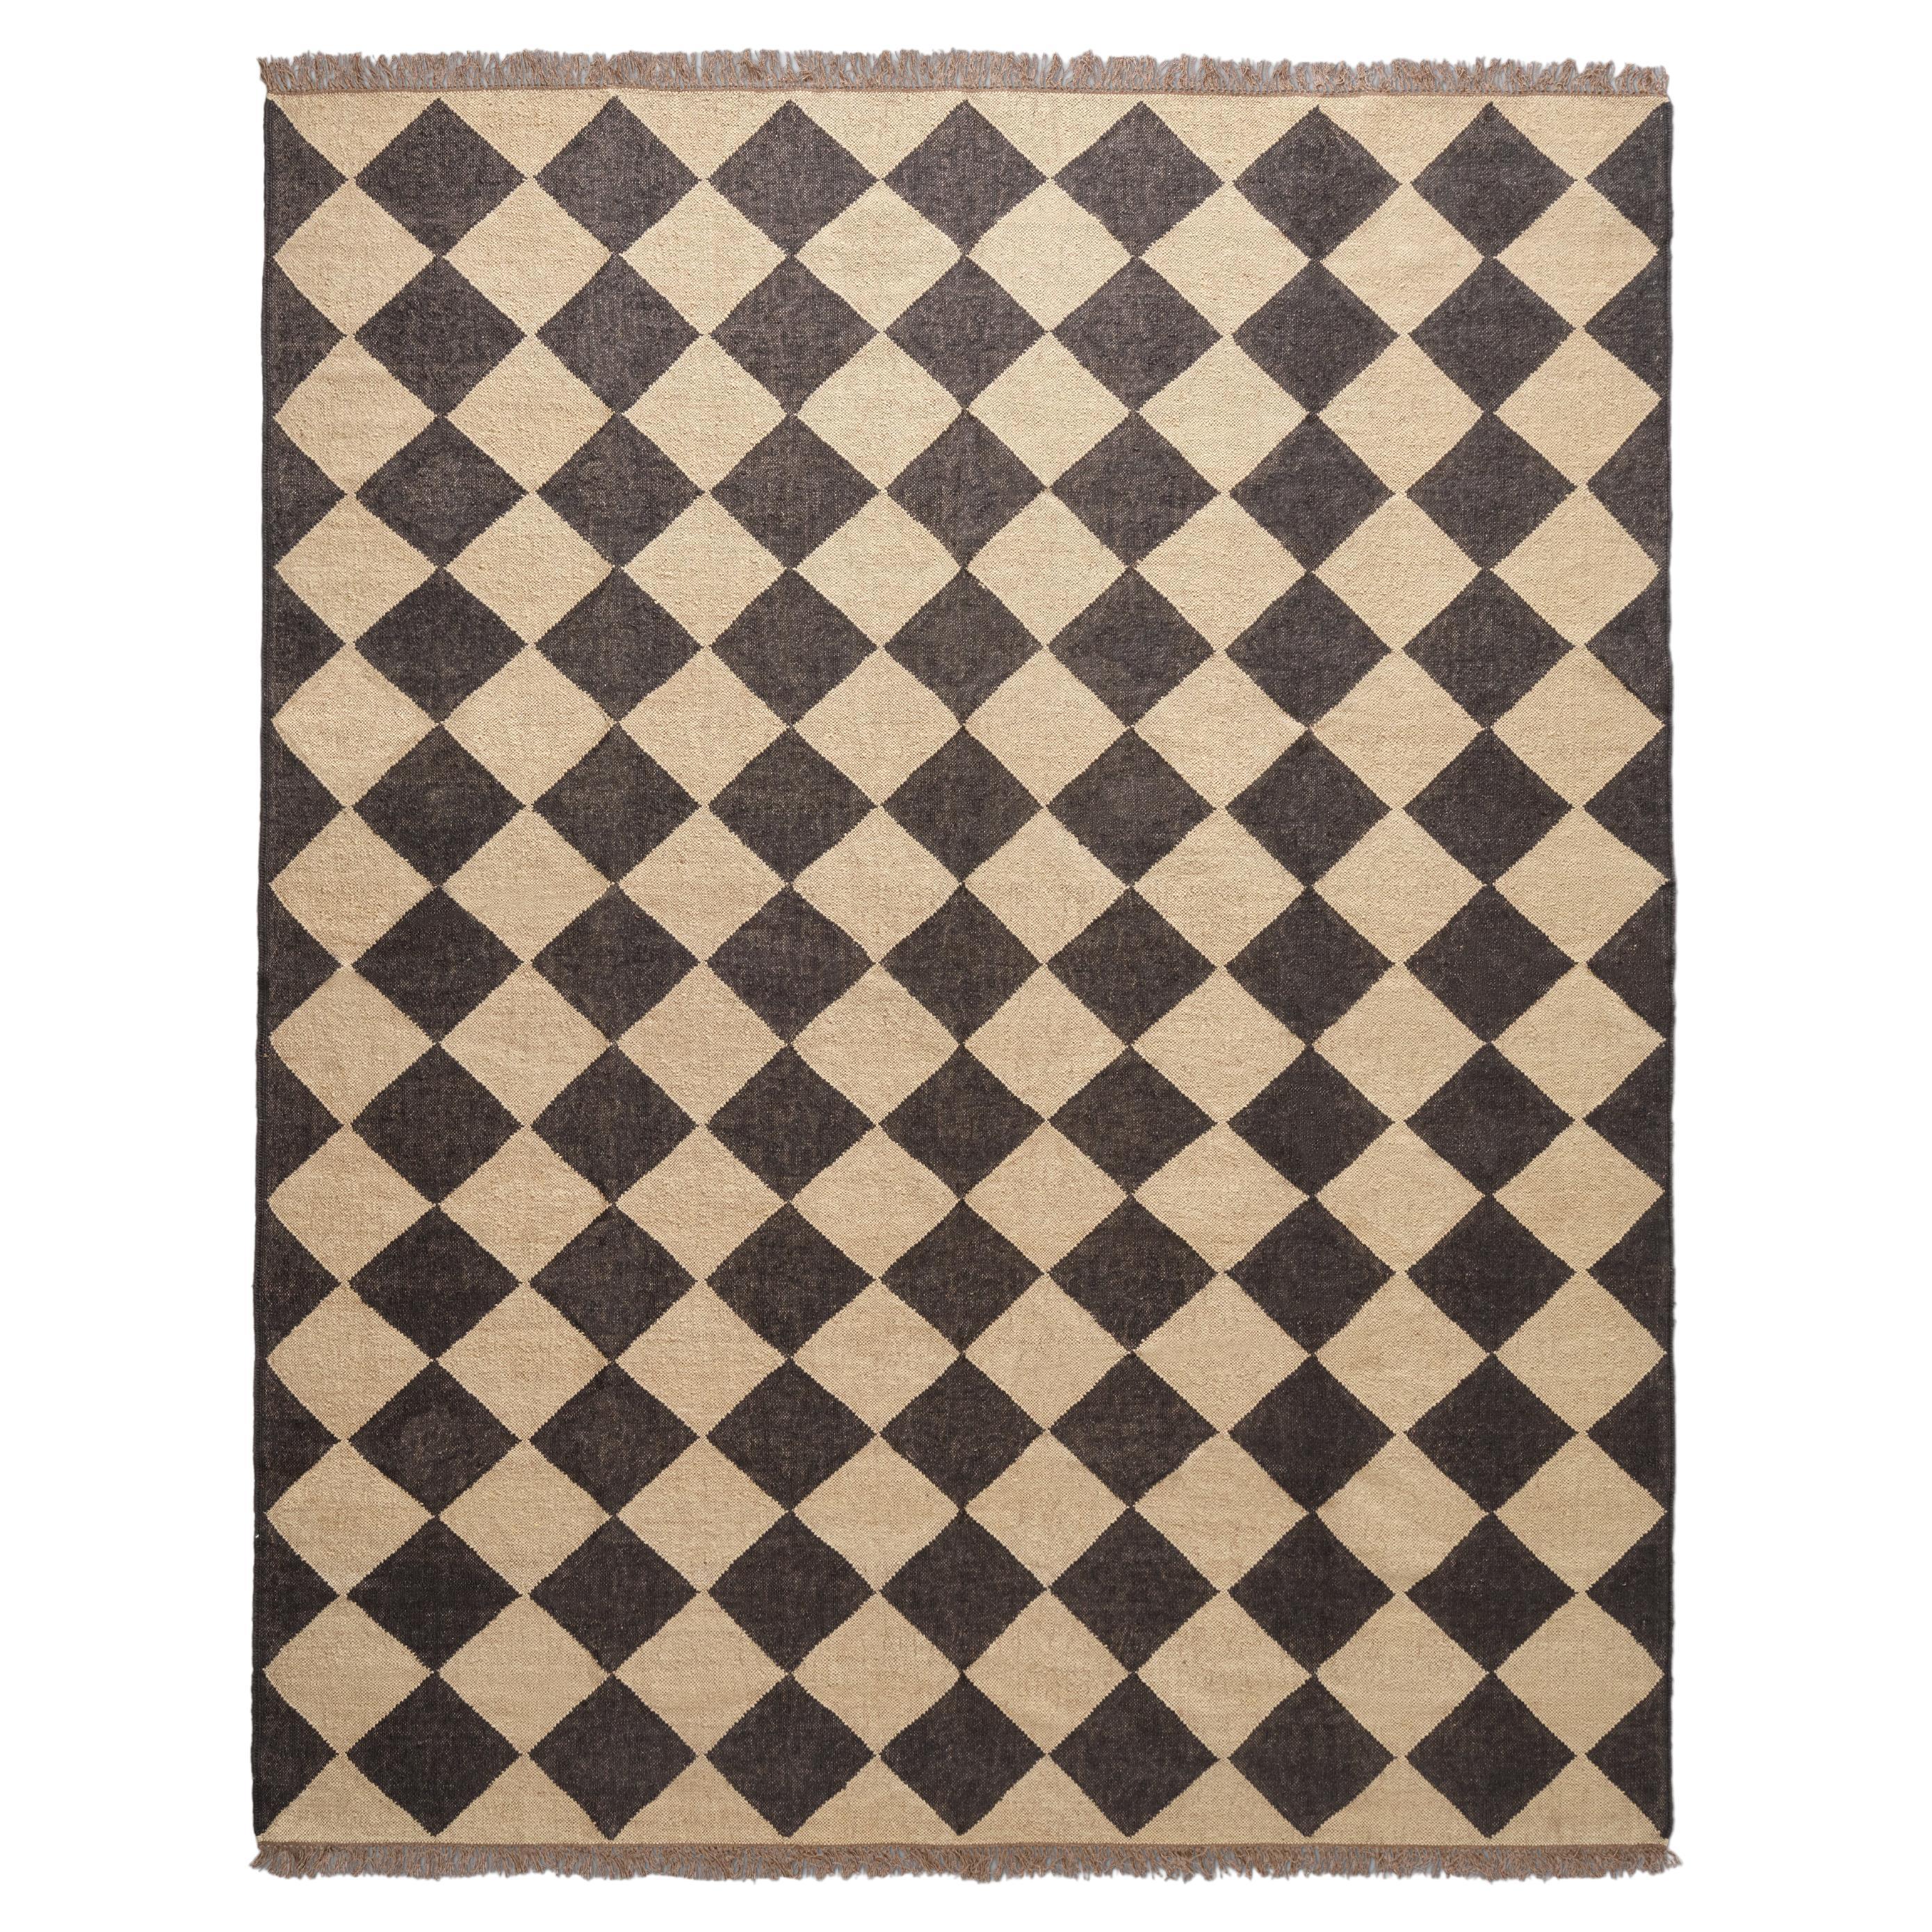 The Forsyth Checkerboard Rug - Diamond Check in Off Black, 8x10 For Sale